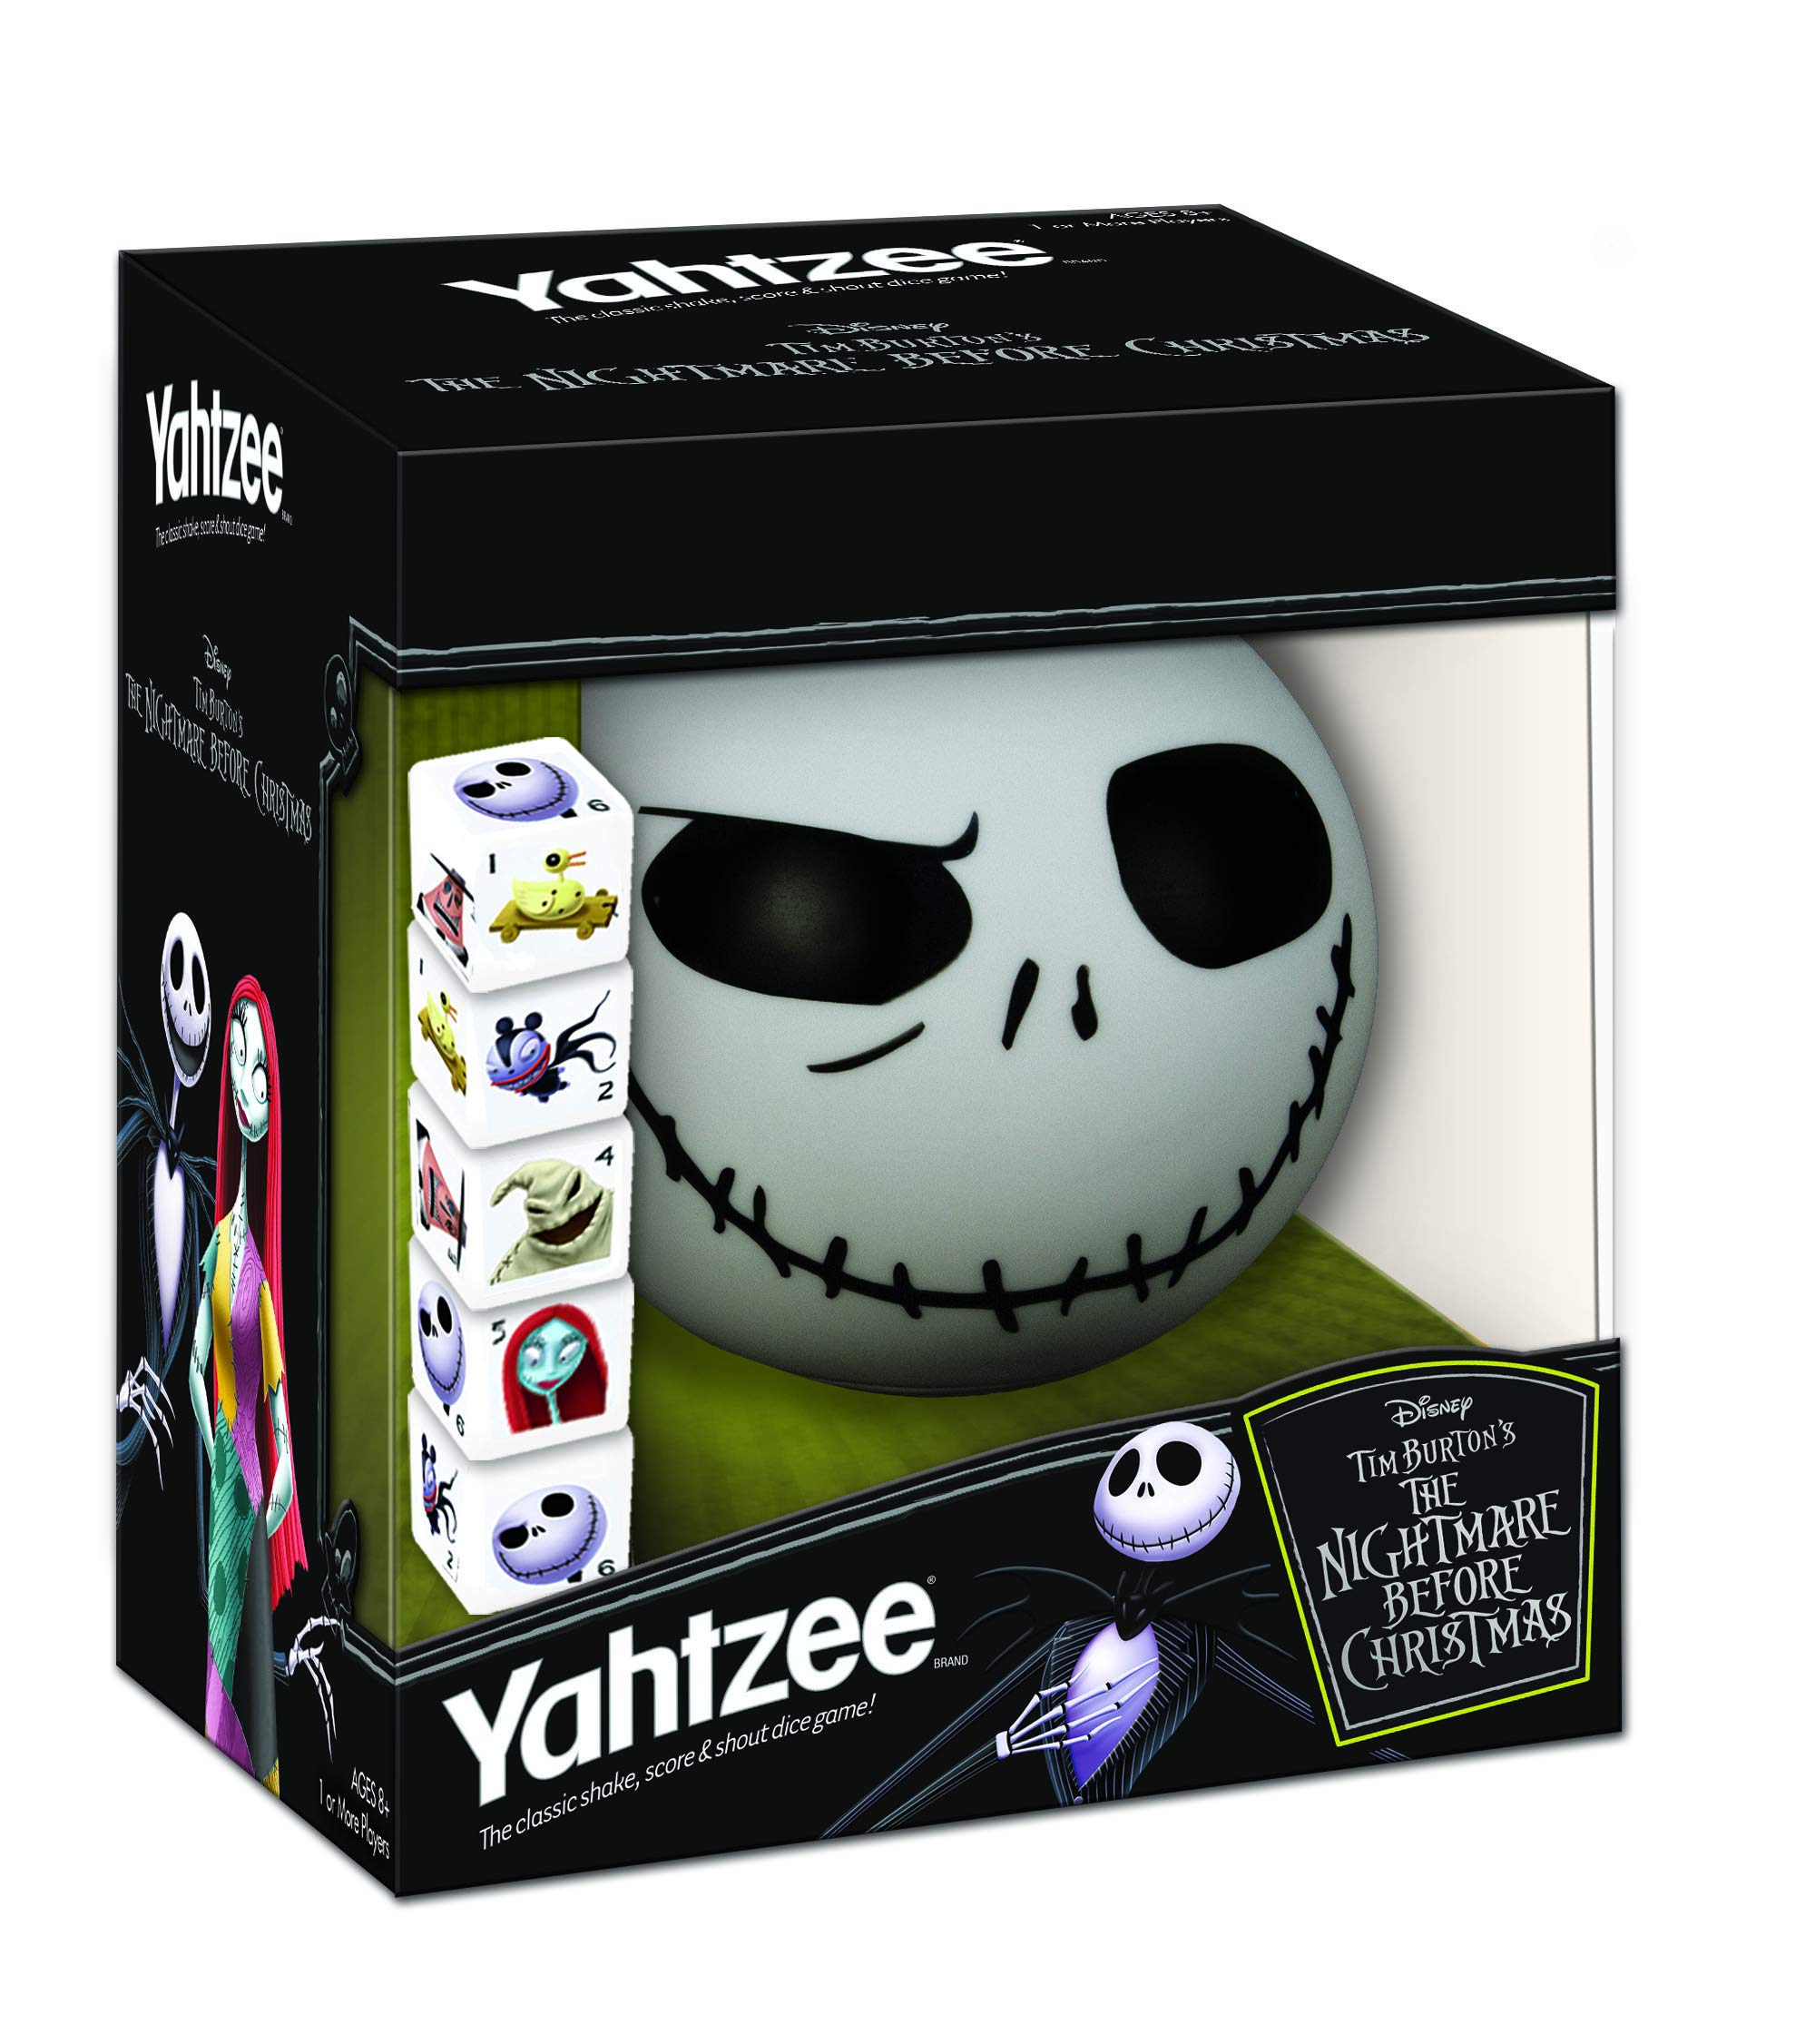 The Nightmare Before Christmas Games in The Nightmare Before Christmas Toys  